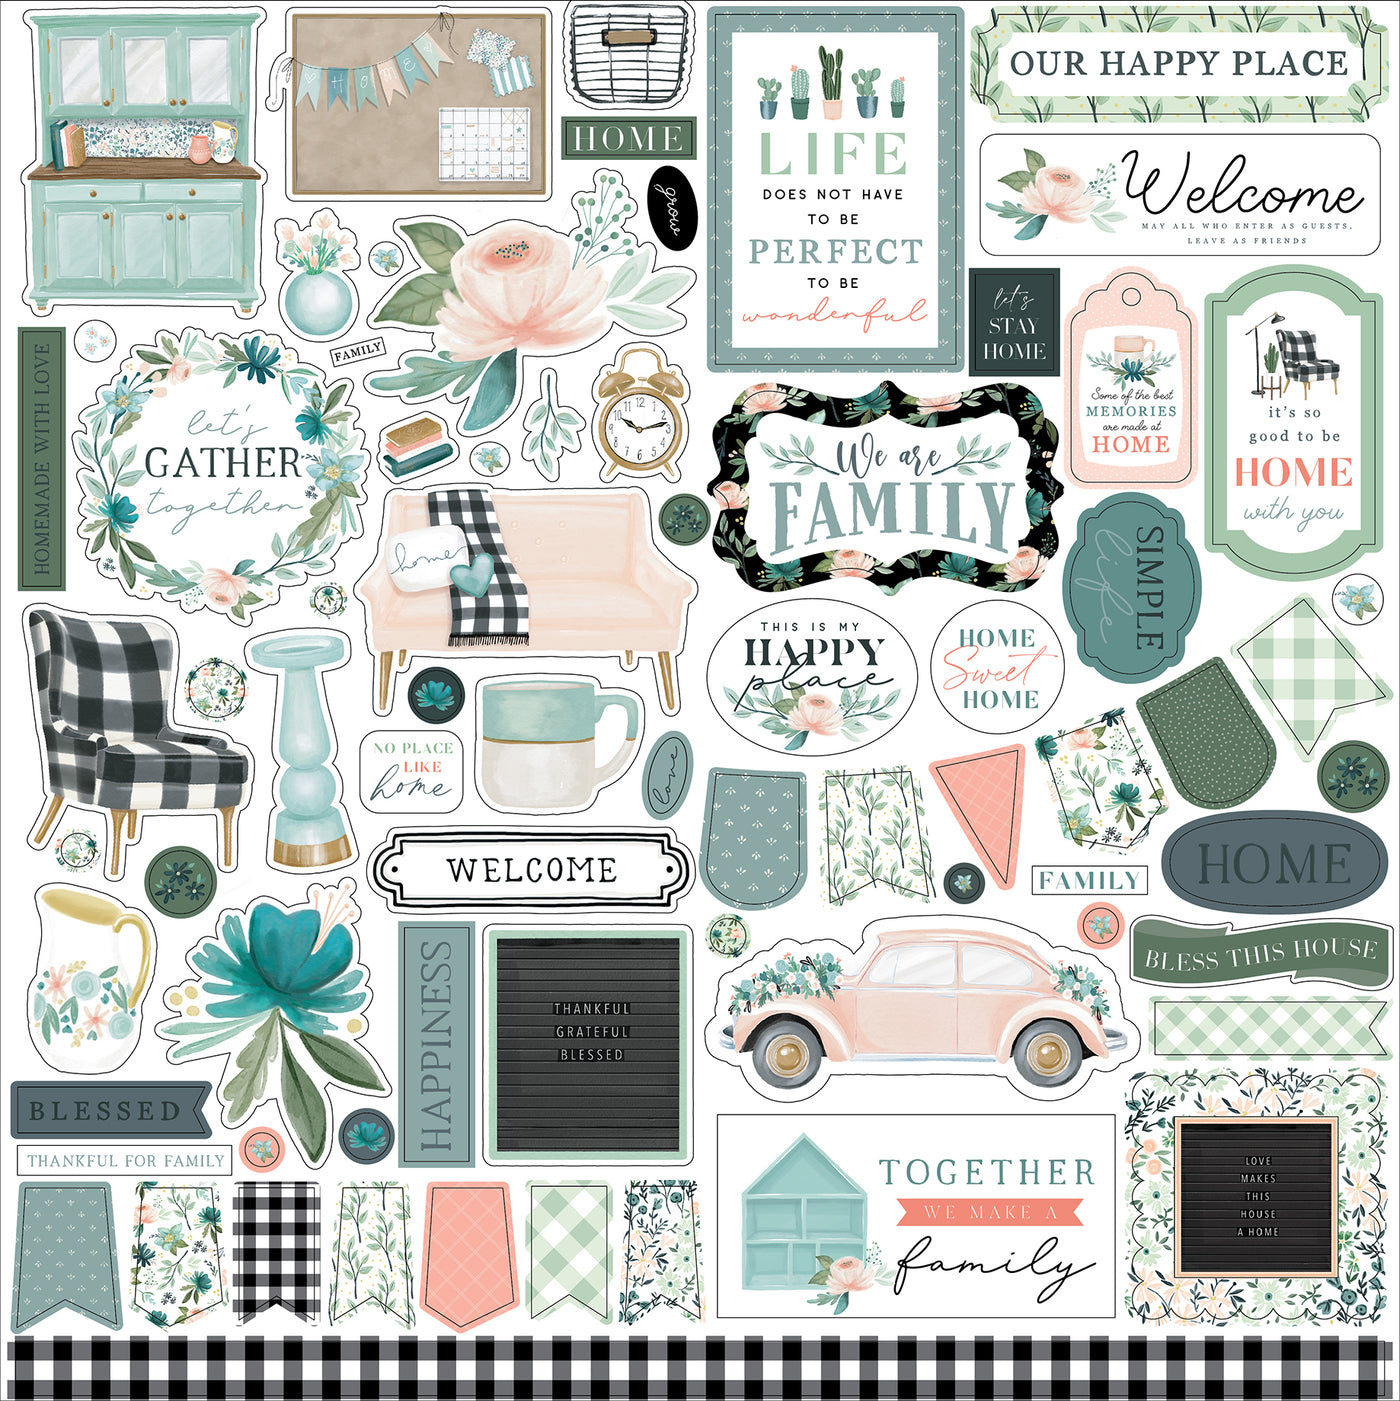 12" x 12" cardstock sticker sheet which has a black gingham border, lots of banners, frames, tags, a car, words and phrases used throughout the collection, flowers, a pitcher and many more images.